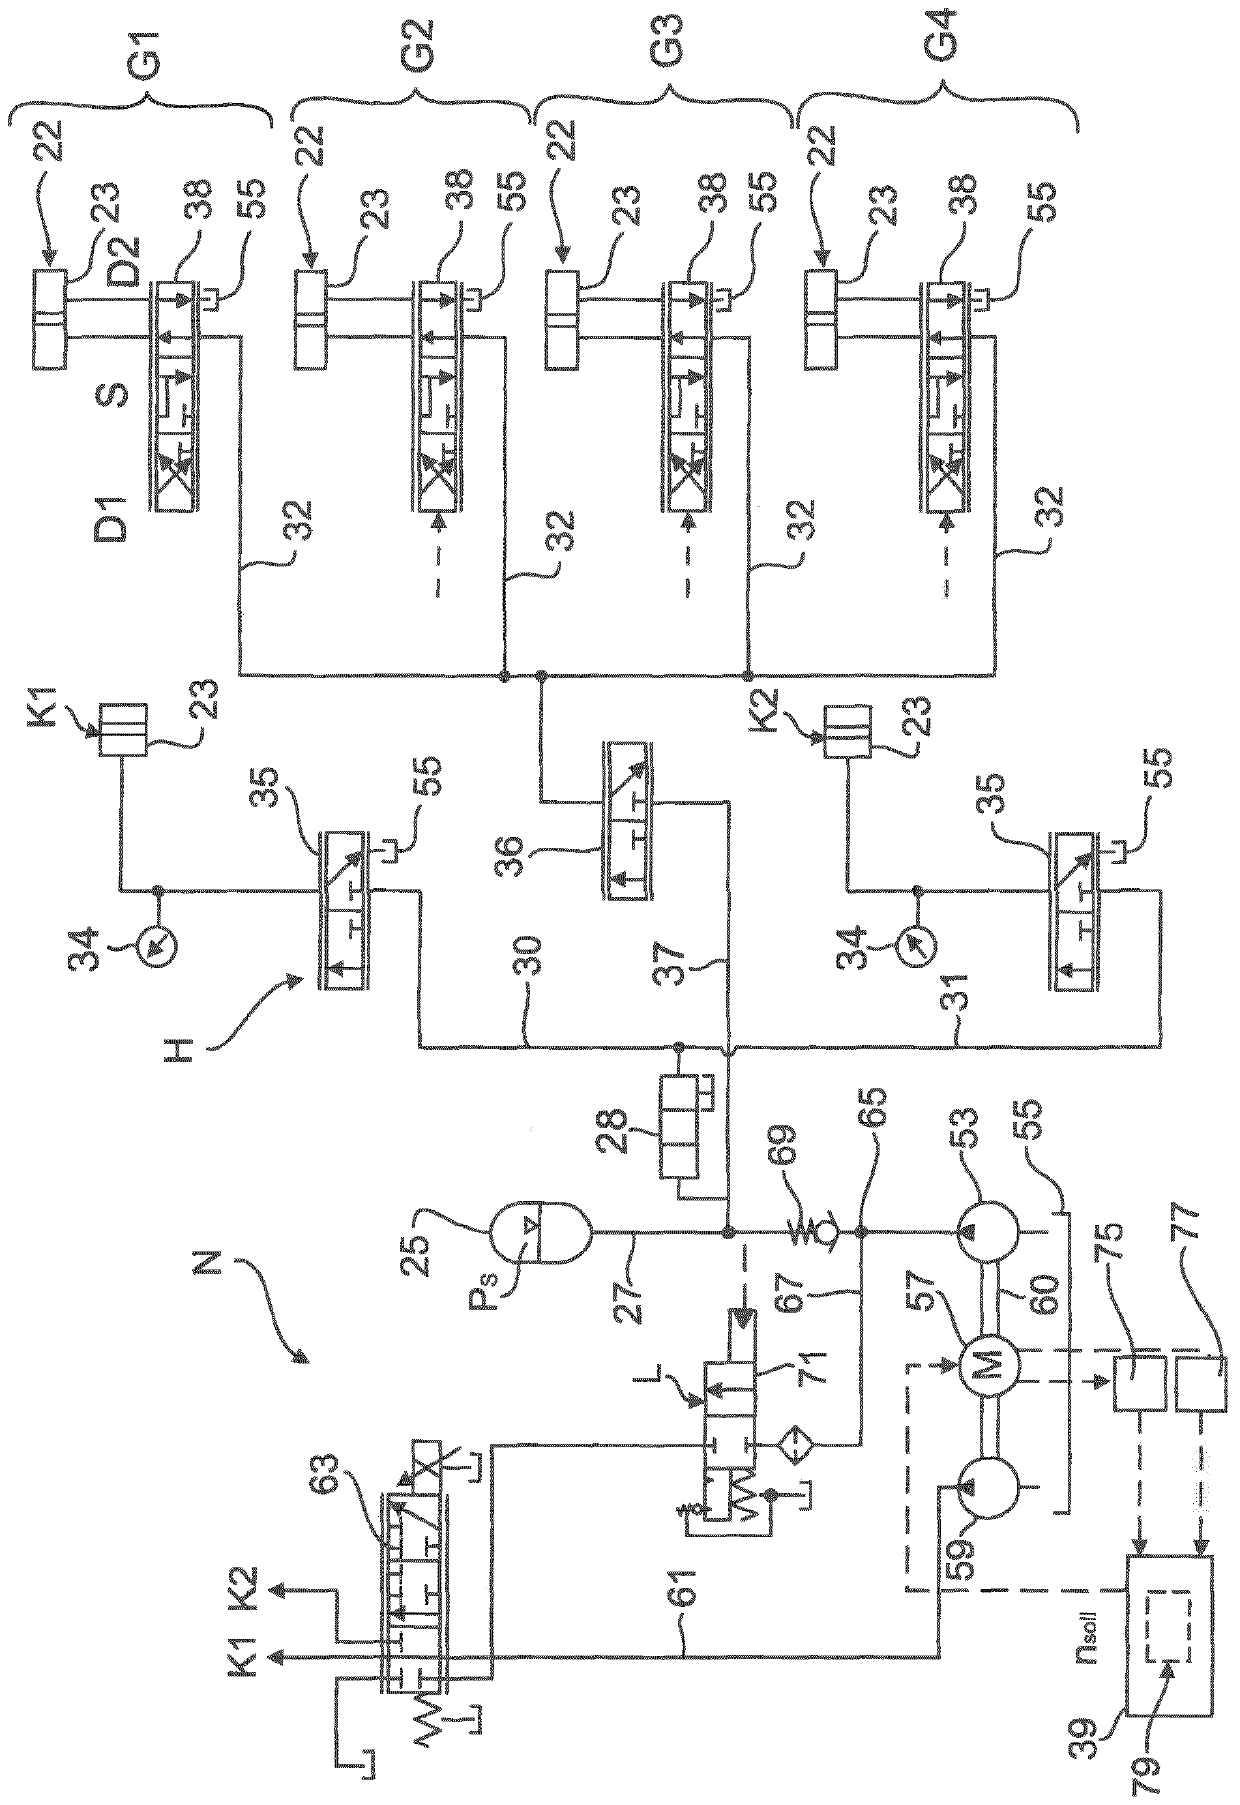 Hydraulic systems for automatic transmissions of motor vehicles